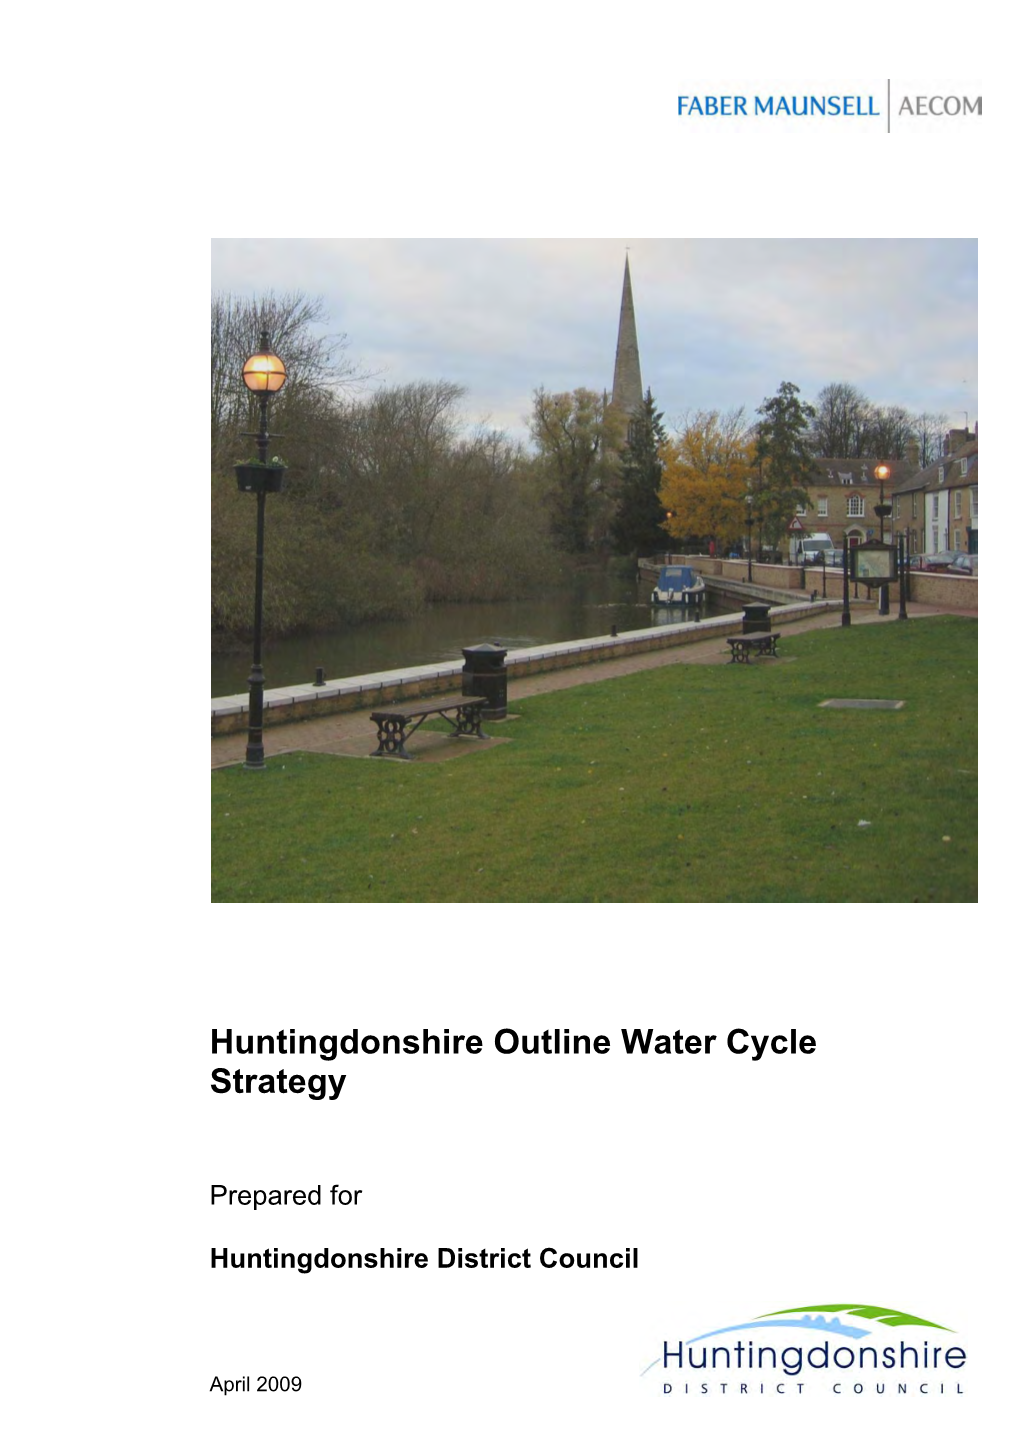 Huntingdonshire Outline Water Cycle Strategy